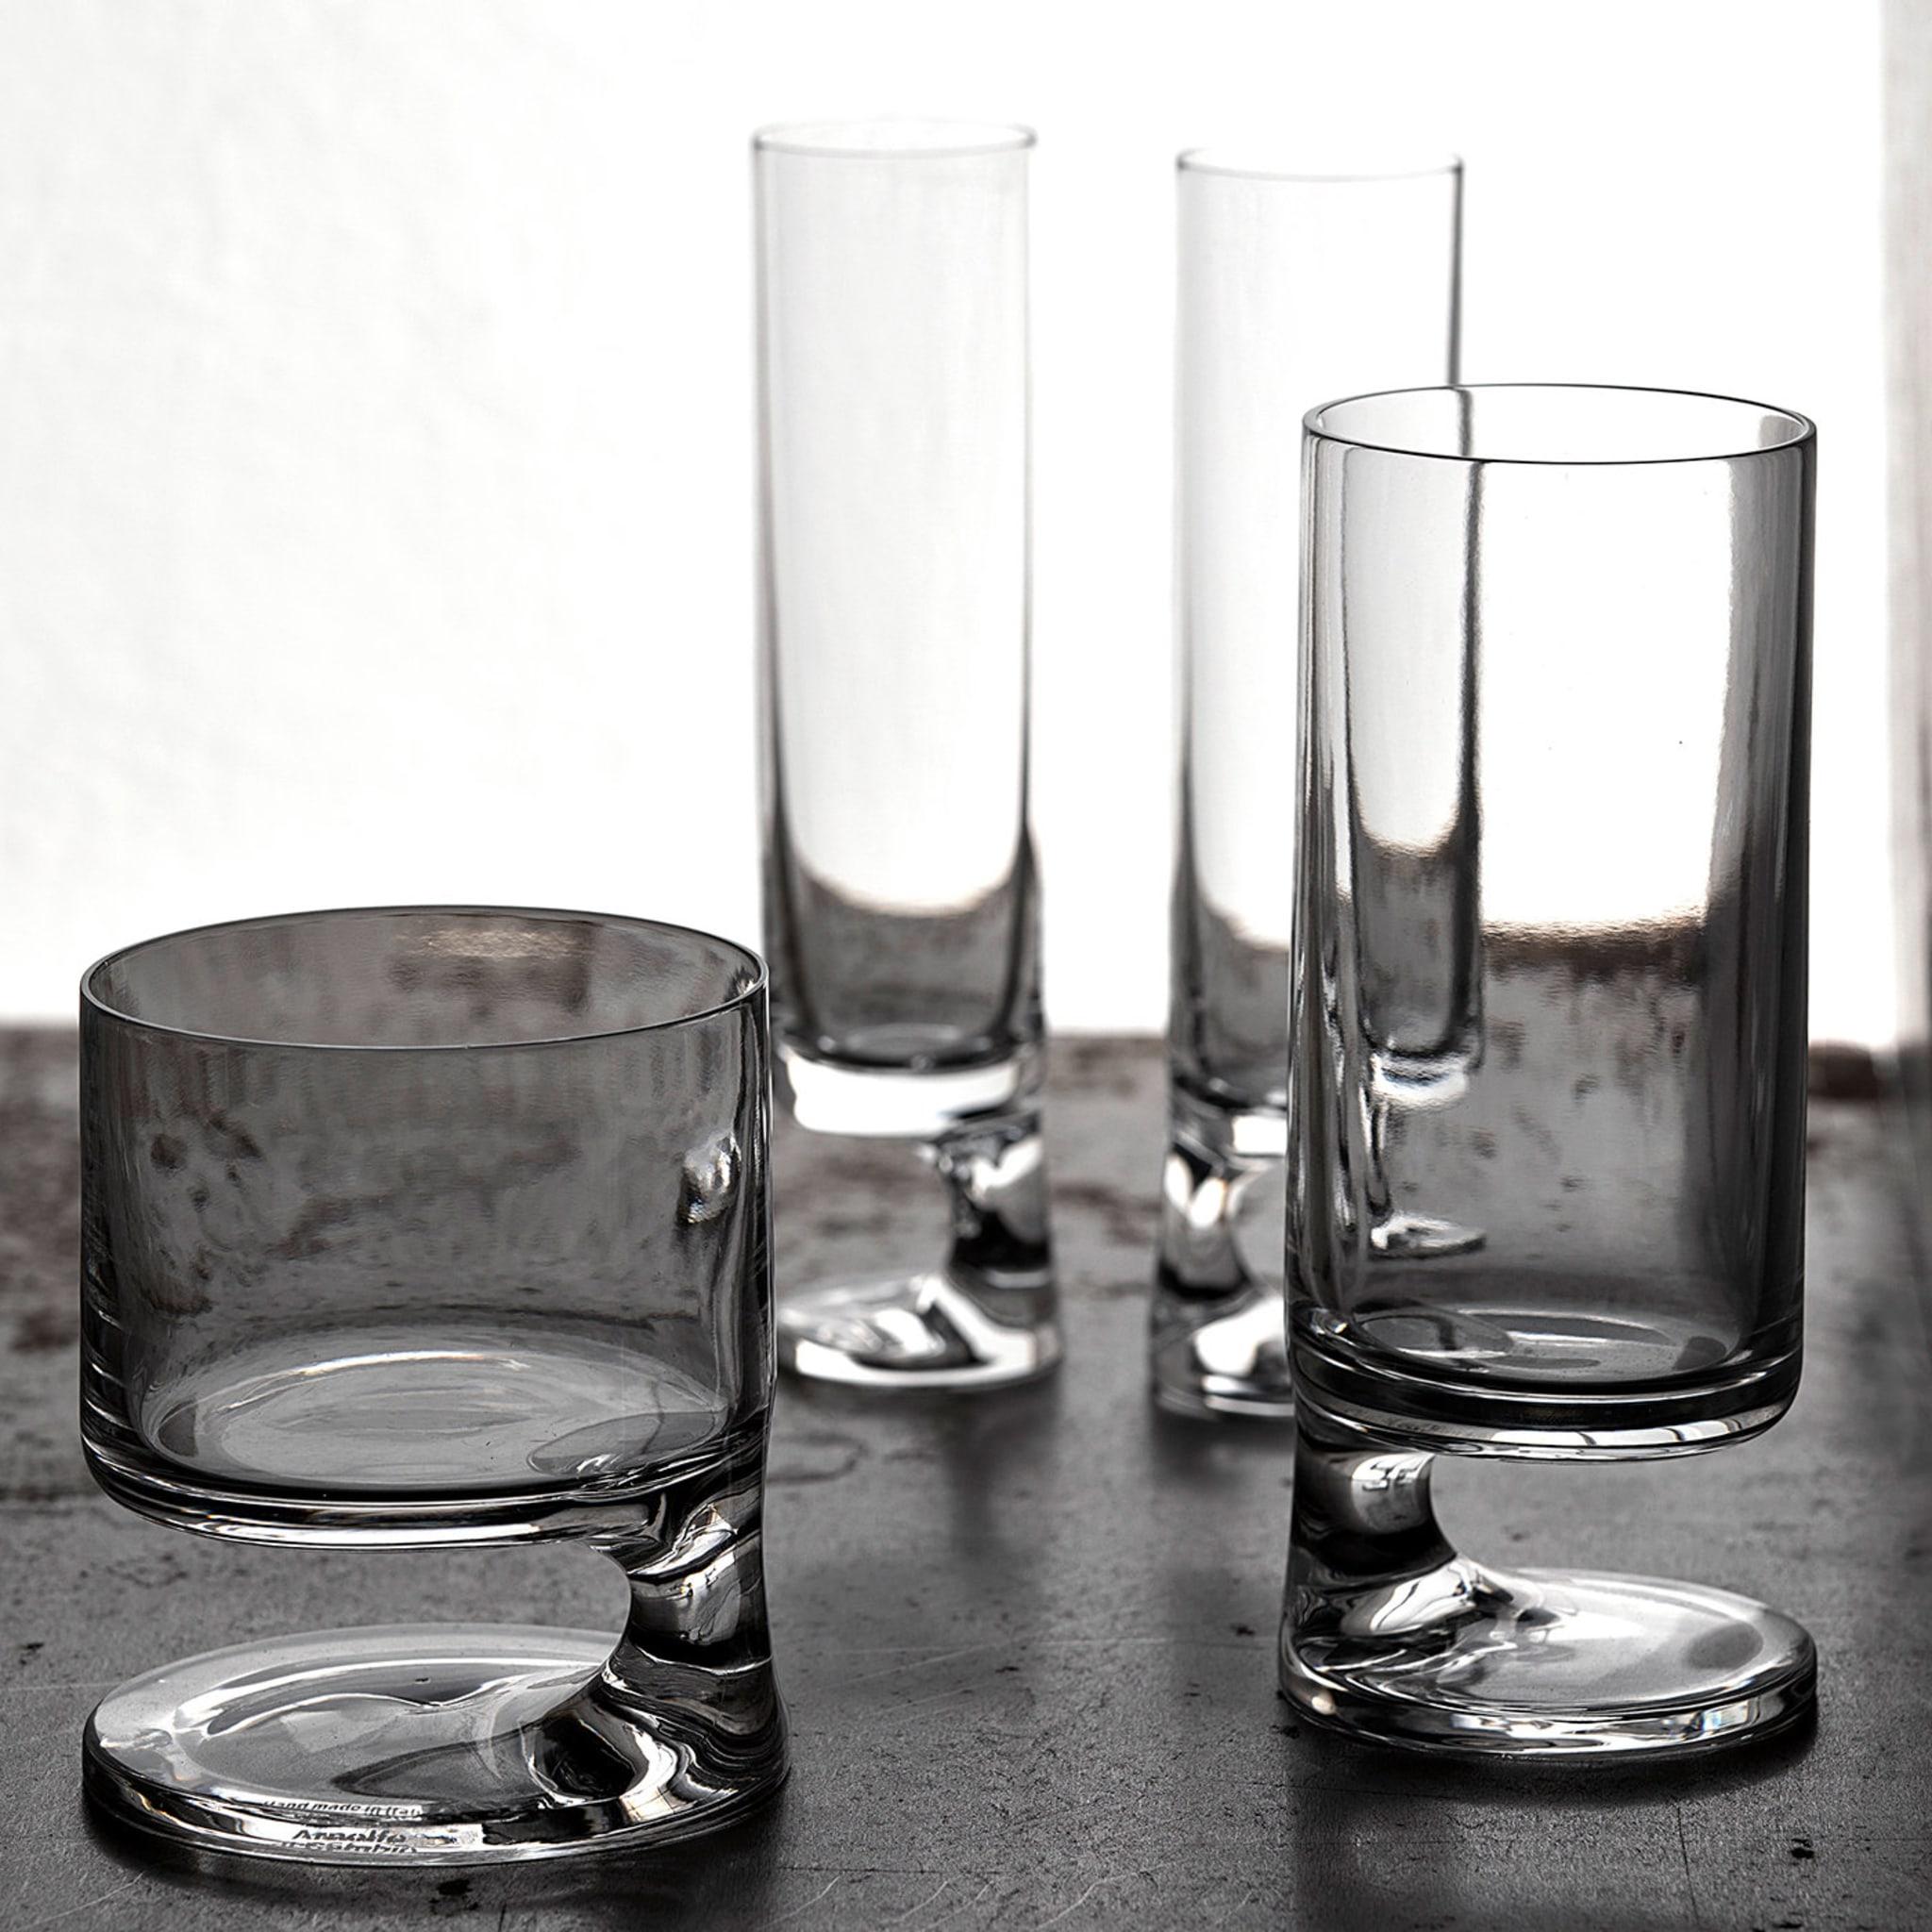 Sophisticated and surprising, this set of two champagne glasses will be an eye-catching addition to a contemporary interior and will captivate the imagination with its unique silhouette. Crafted of handmade mouth-blown crystal, these two glasses are